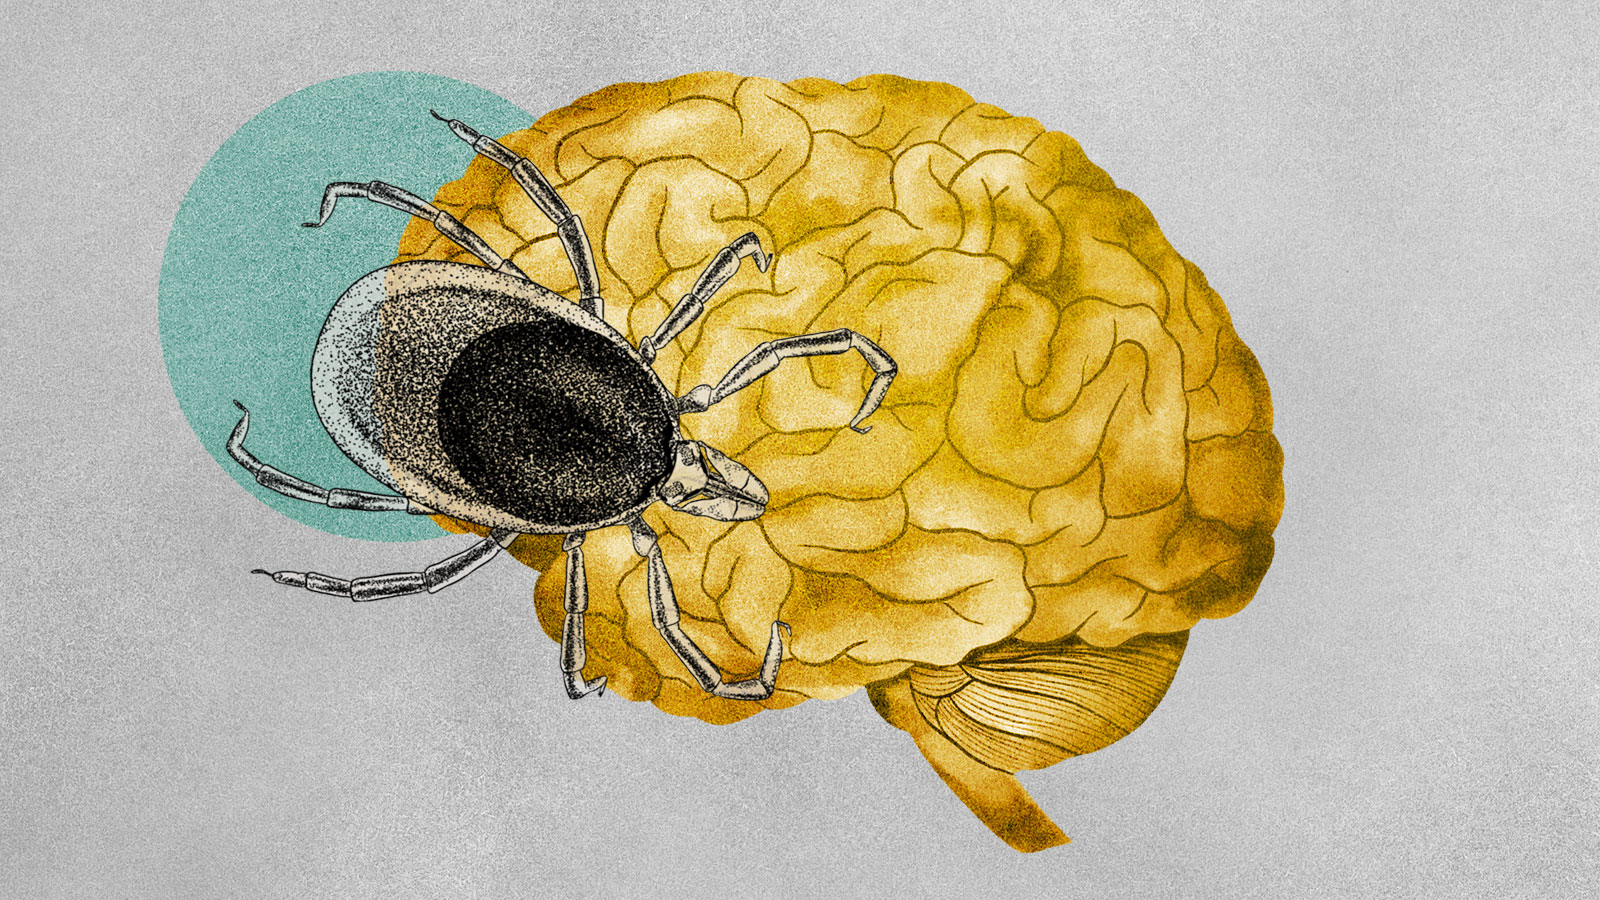 Illustration of a tick on top of a human brain